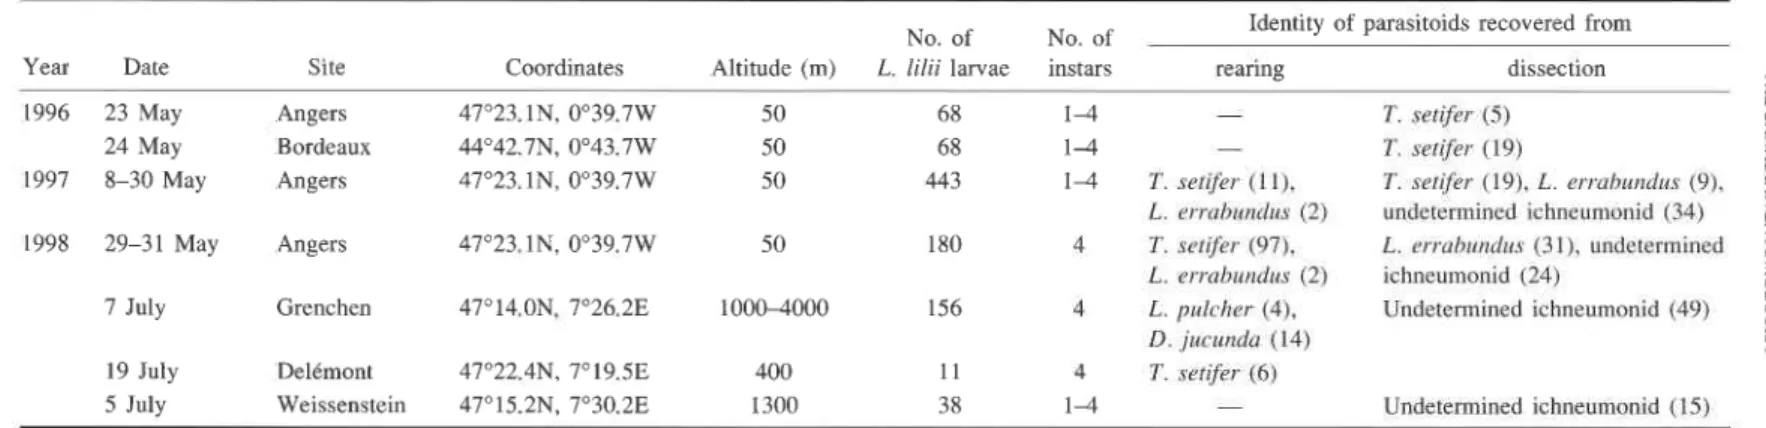 TABLE  1. Parasitoids either  reared to adult o r  dissected  from  larvae of  Lilioceris  lilii  collected  in  Europe